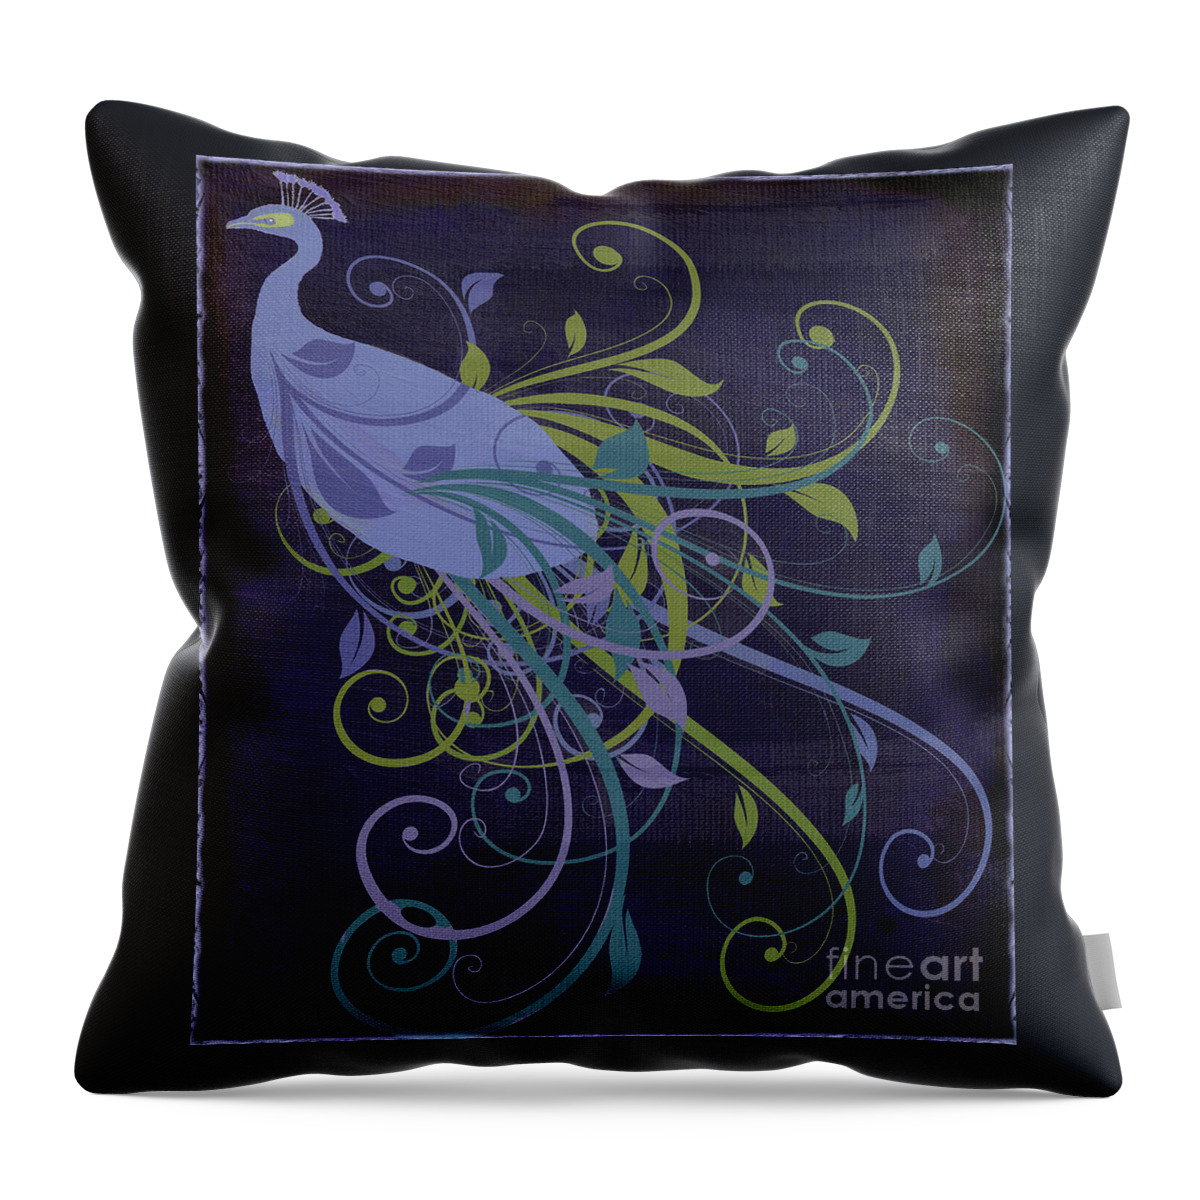 Peacock Throw Pillow featuring the painting Blue Peacock Art Nouveau by Mindy Sommers